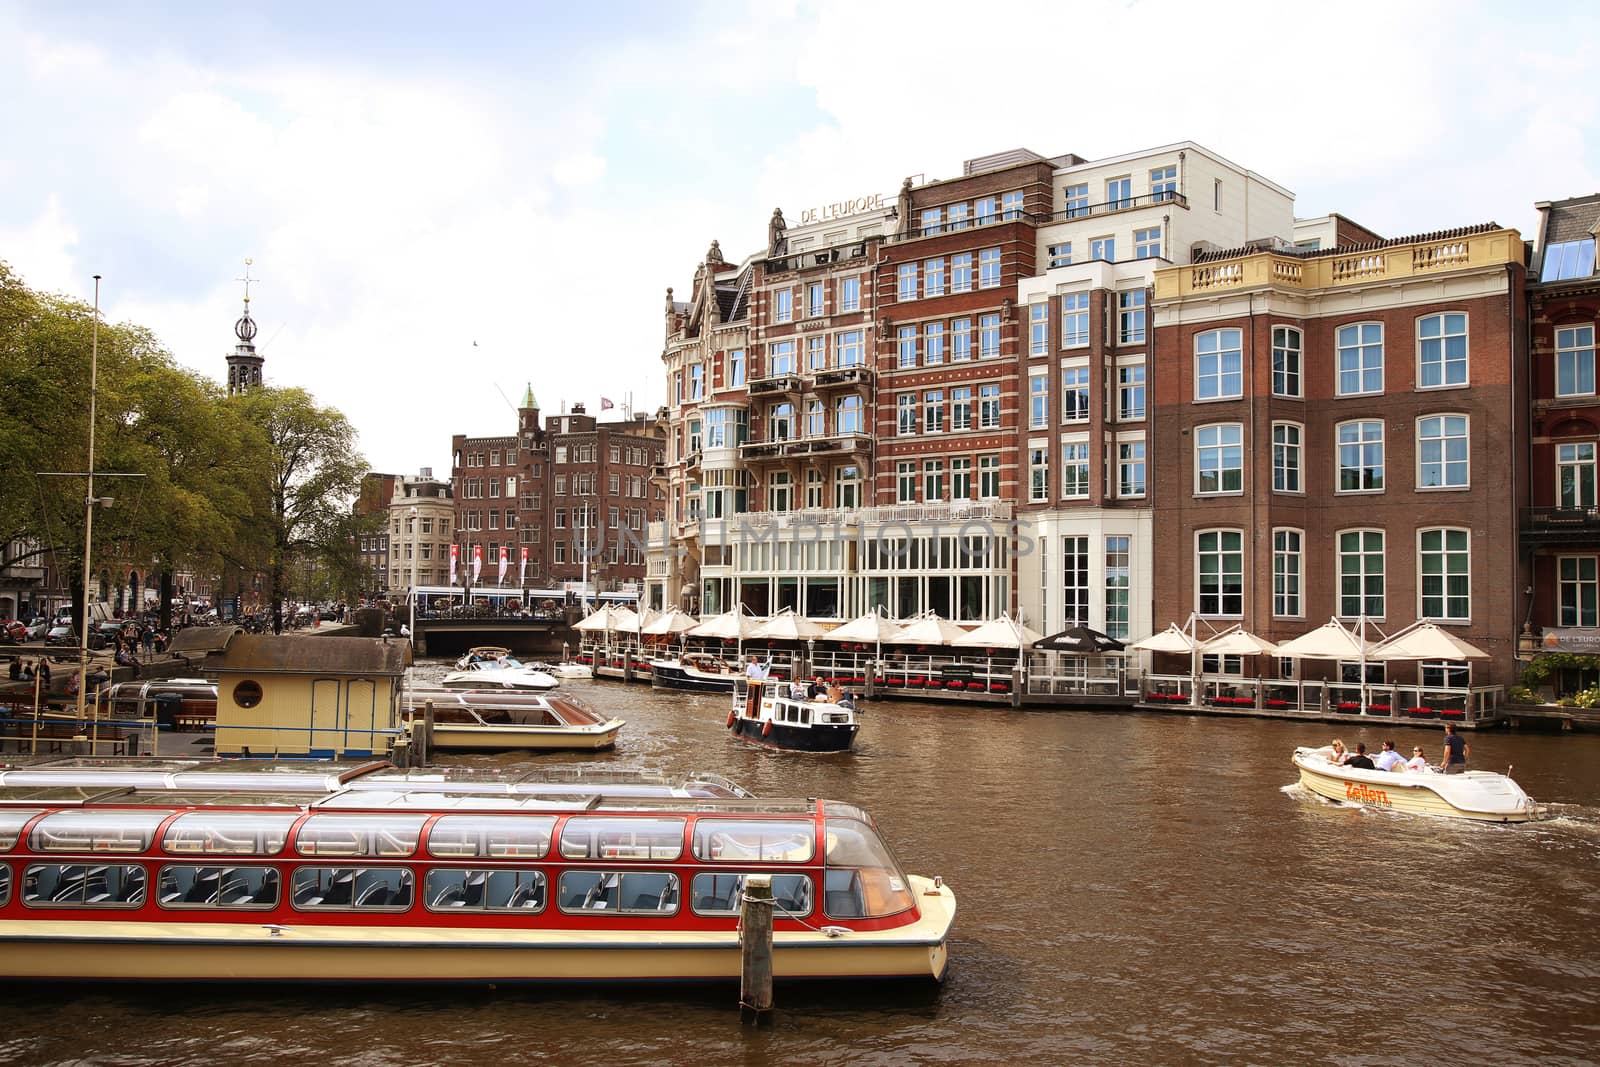 AMSTERDAM, THE NETHERLANDS - AUGUST 19, 2015: View on Hotel de l'Europe and Amstel street from Halvemaansbrug. Street life, Canal, bicycle and boat in Amsterdam. Amsterdam is capital of the Netherlands on August 19, 2015.